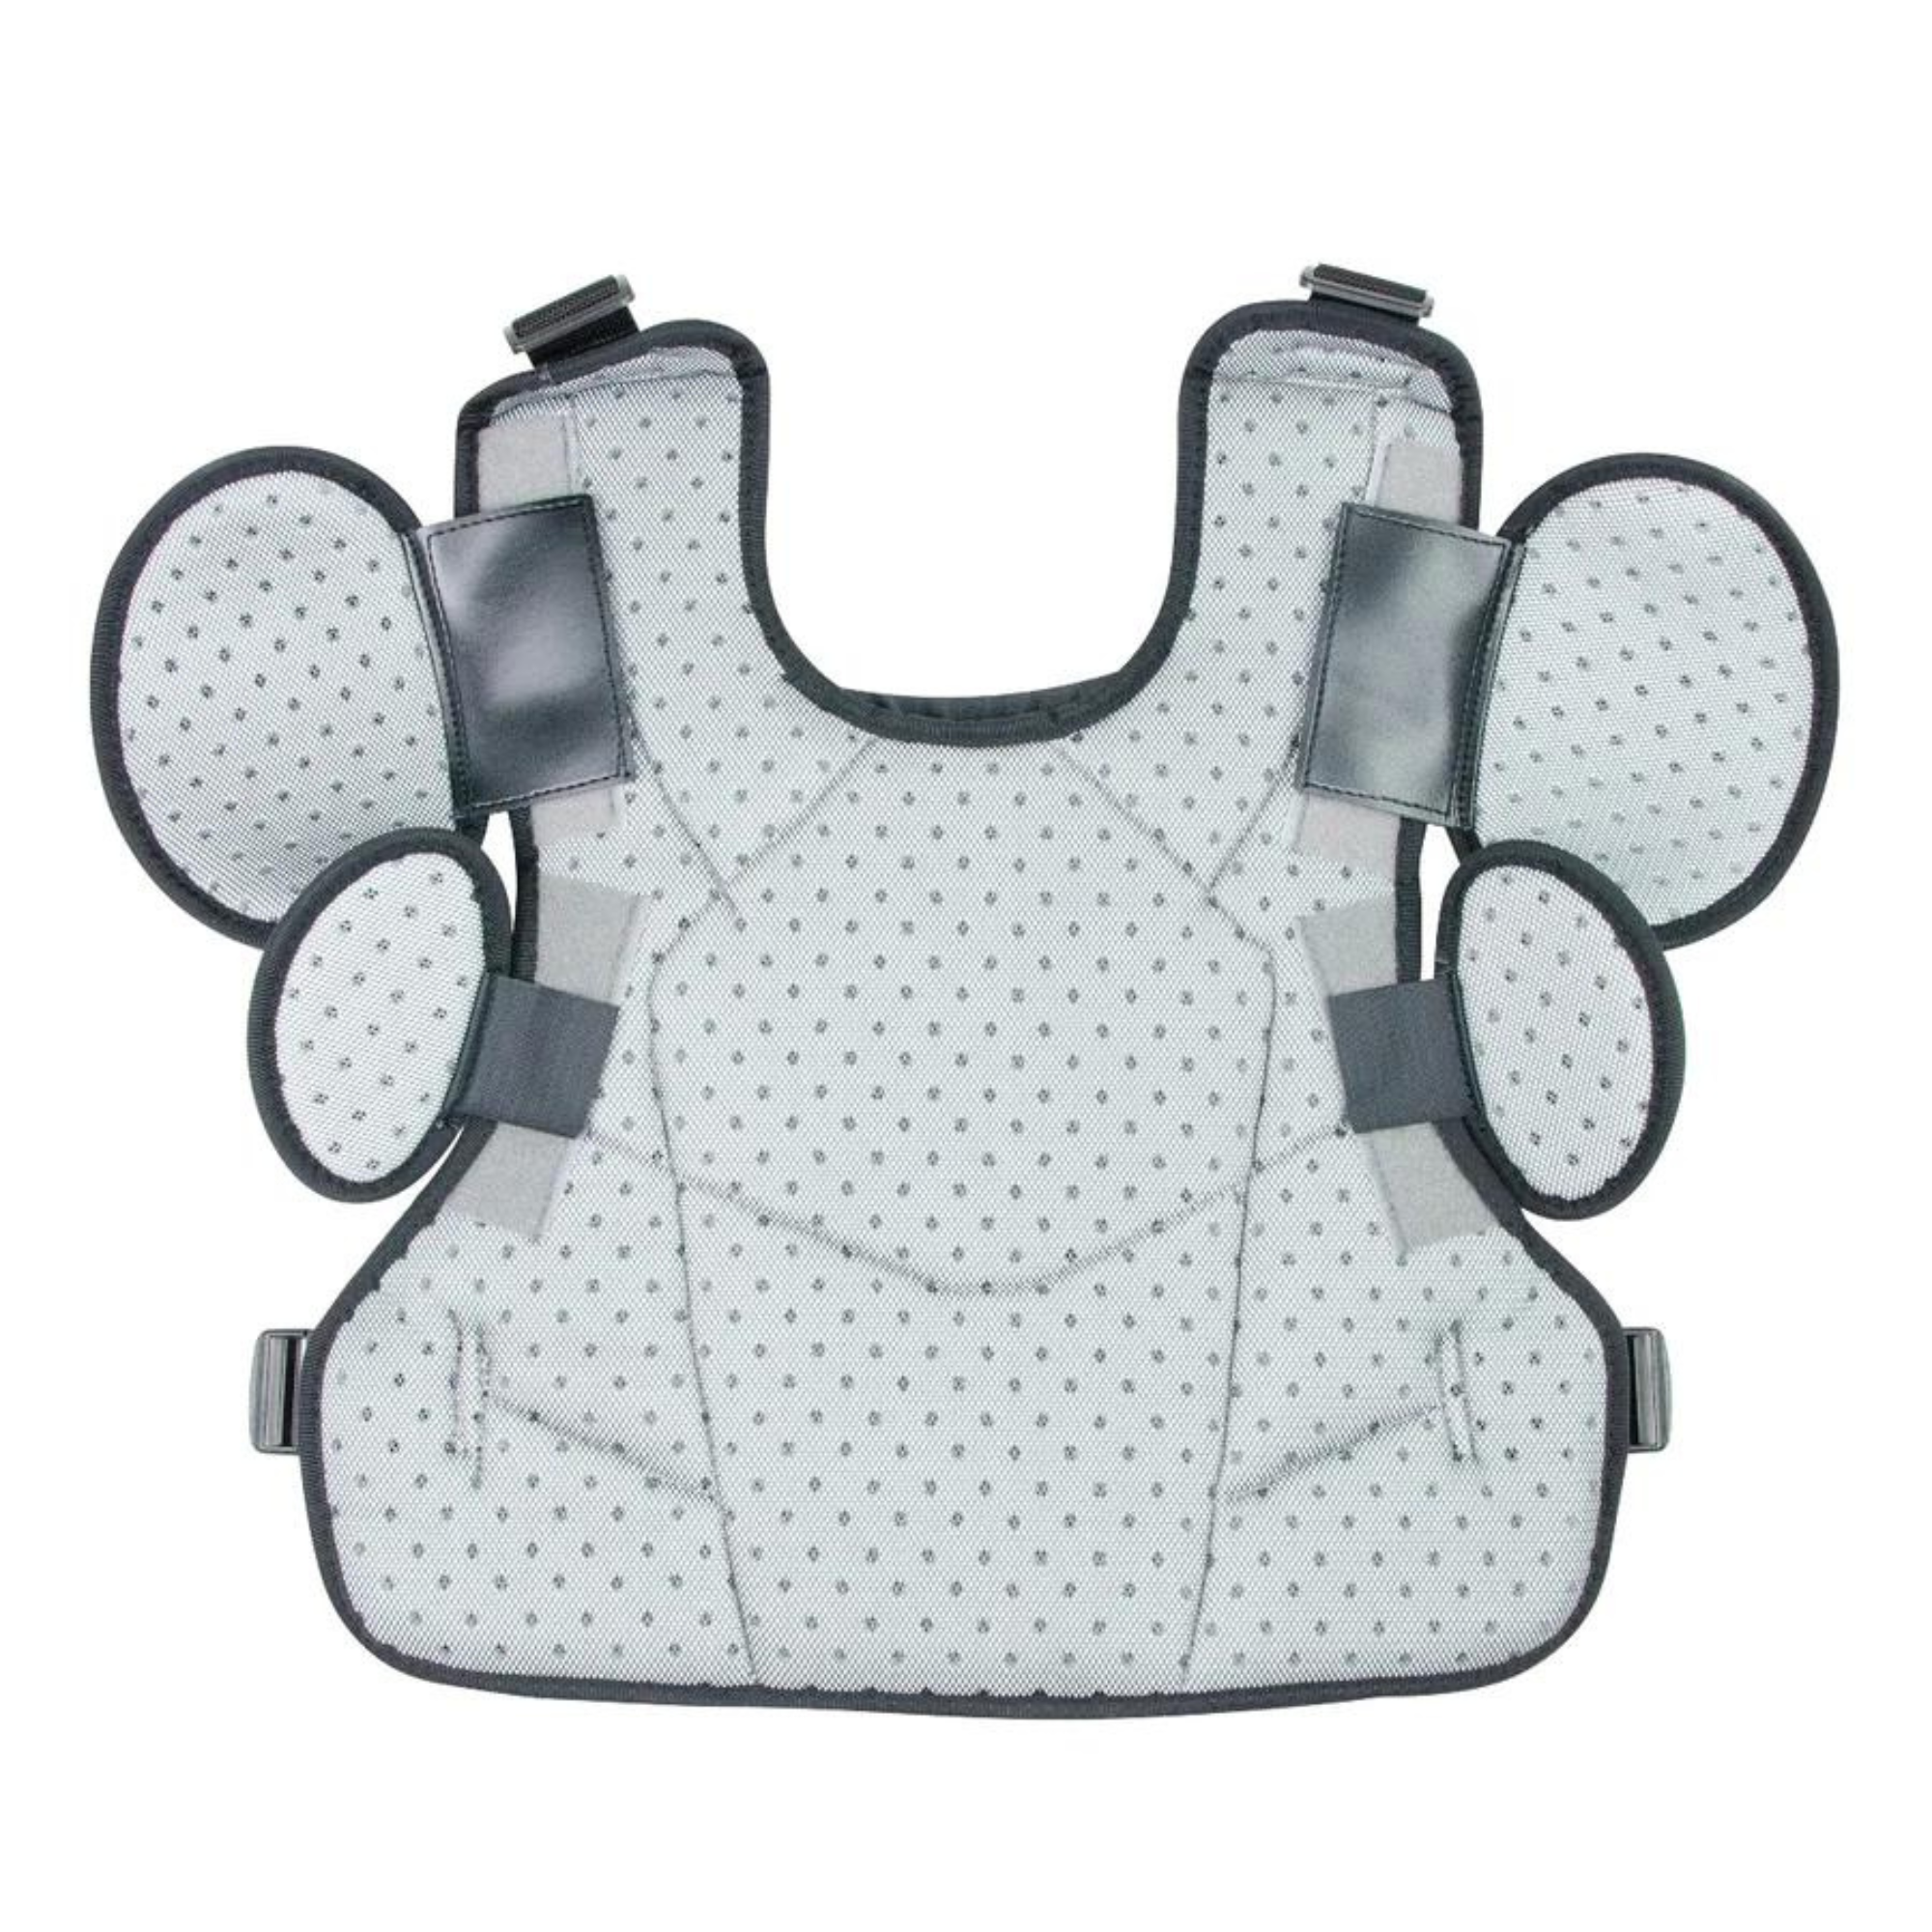 All-Star Pro Internal Shell Umpire Chest Protector / 13"